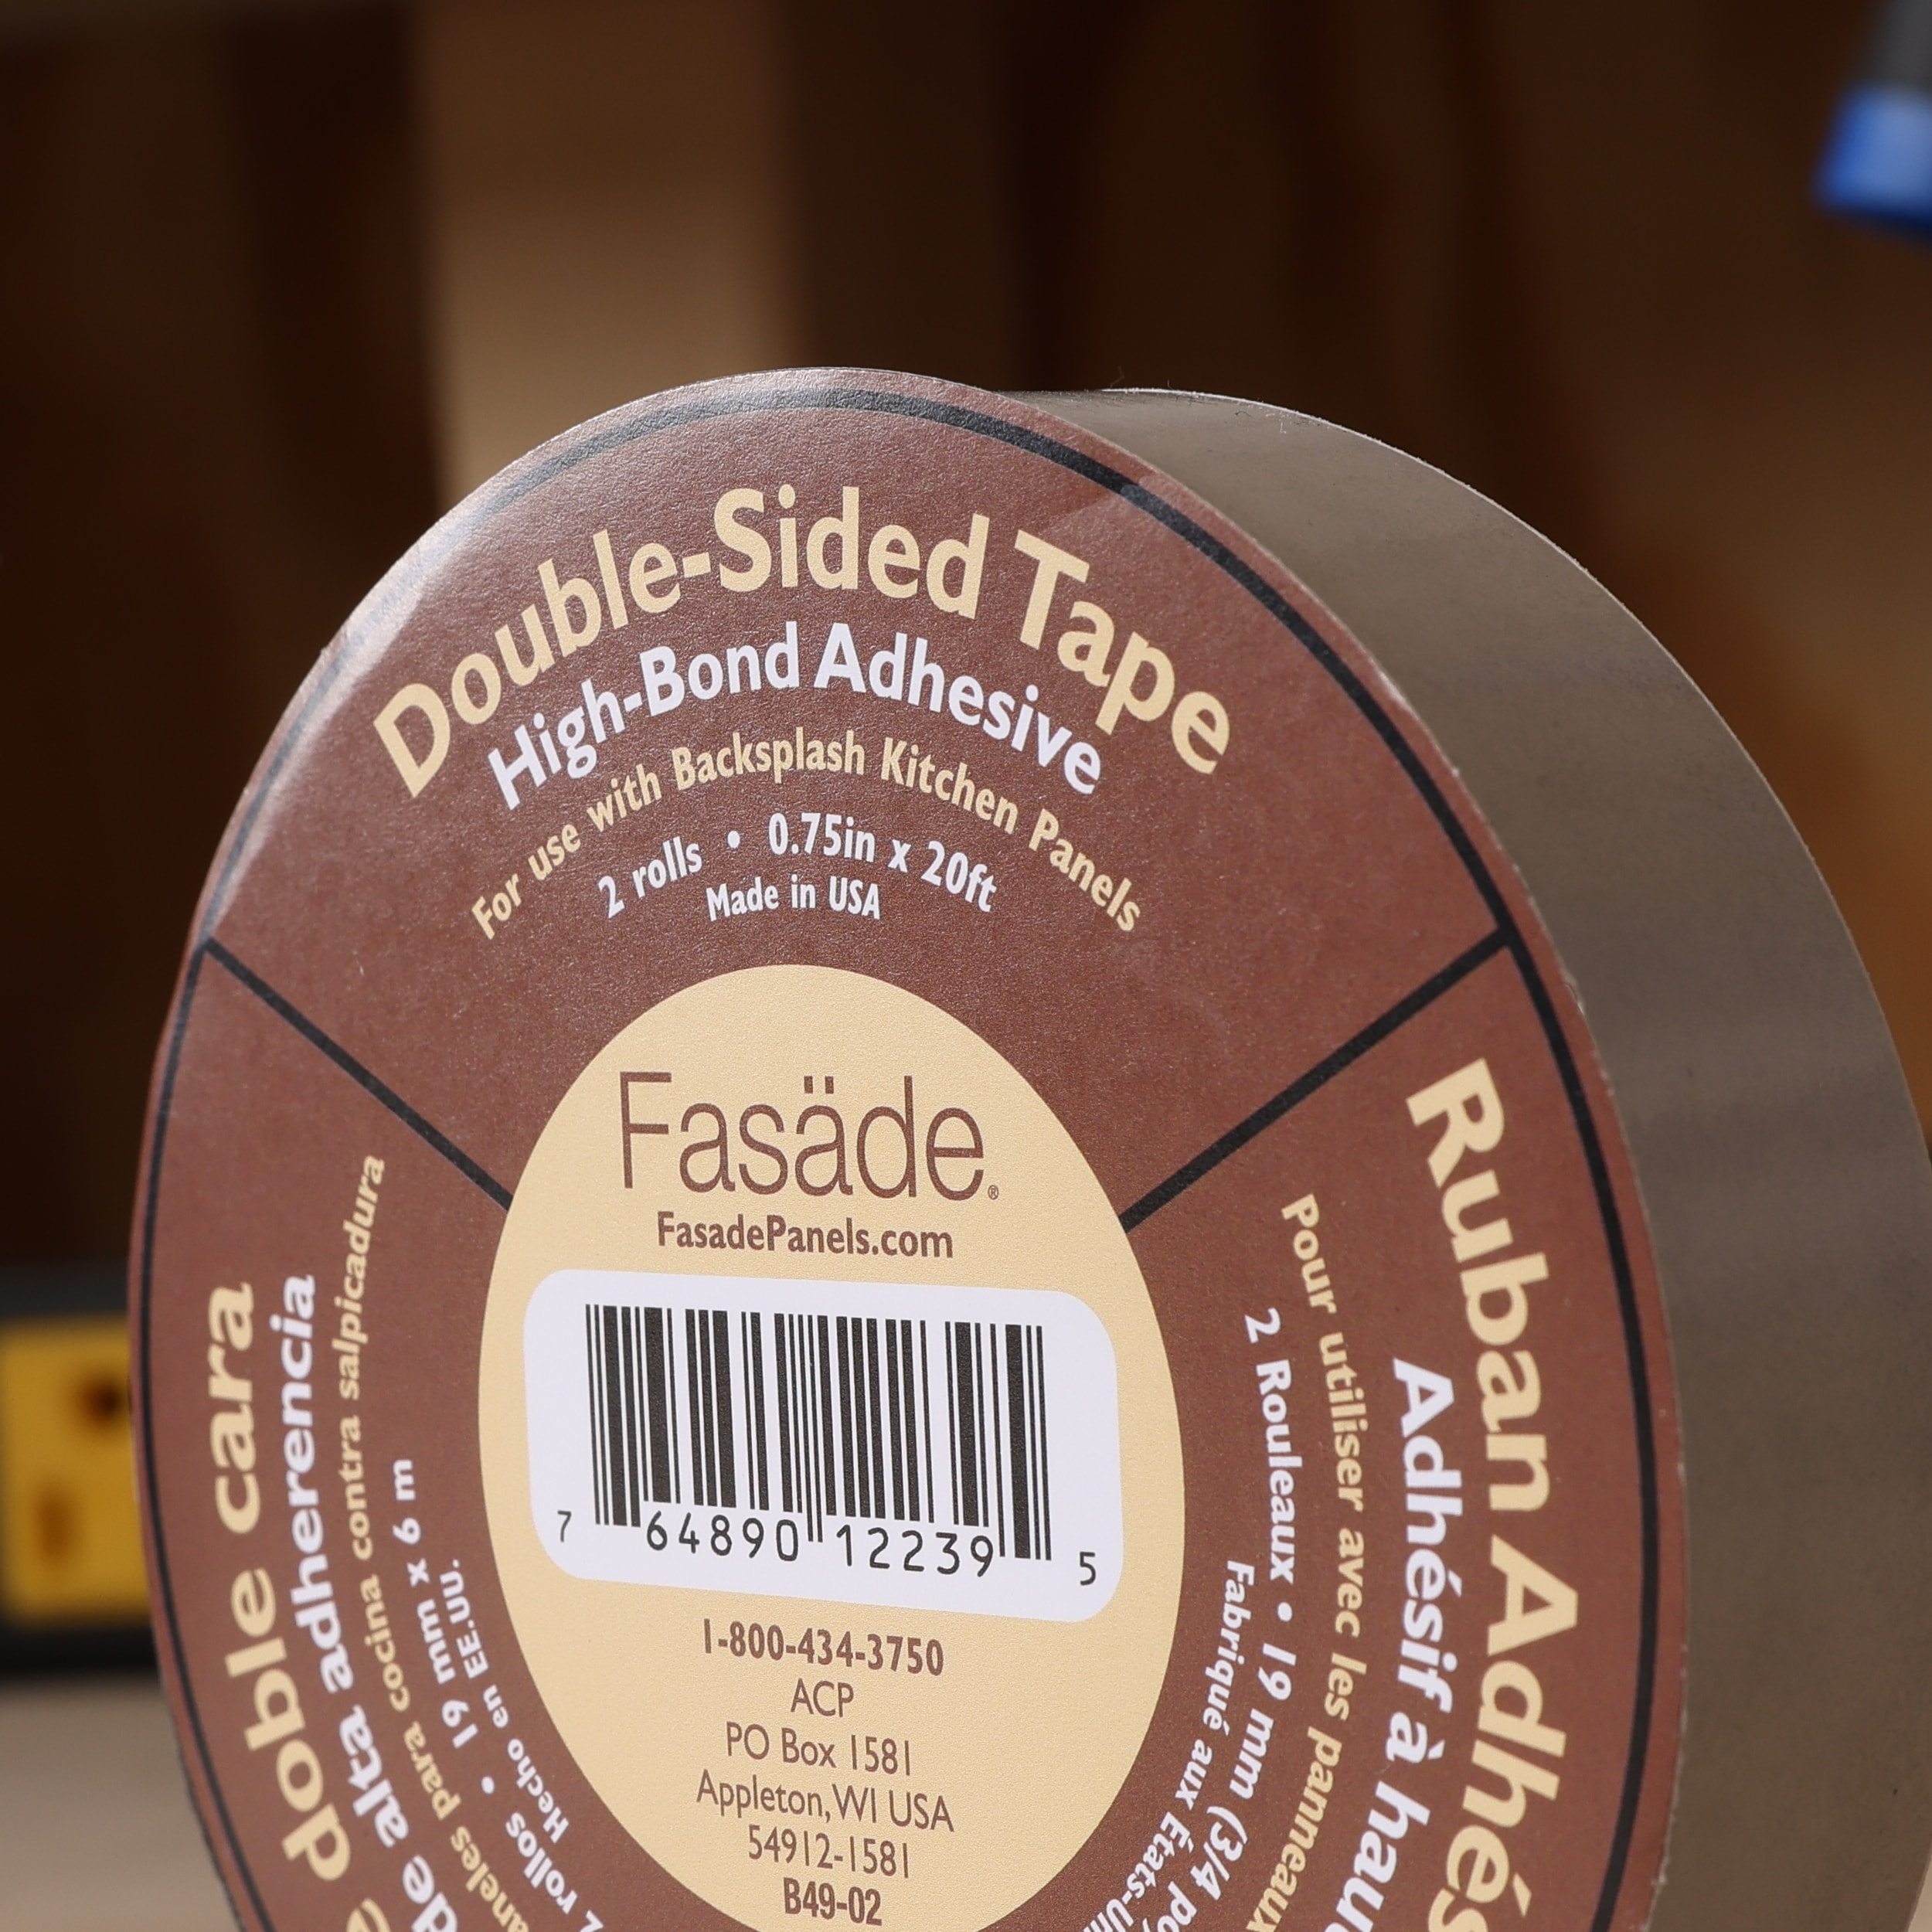 Fasade Double Sided Tile Decorative Wall Tile Adhesive Tape B49-02